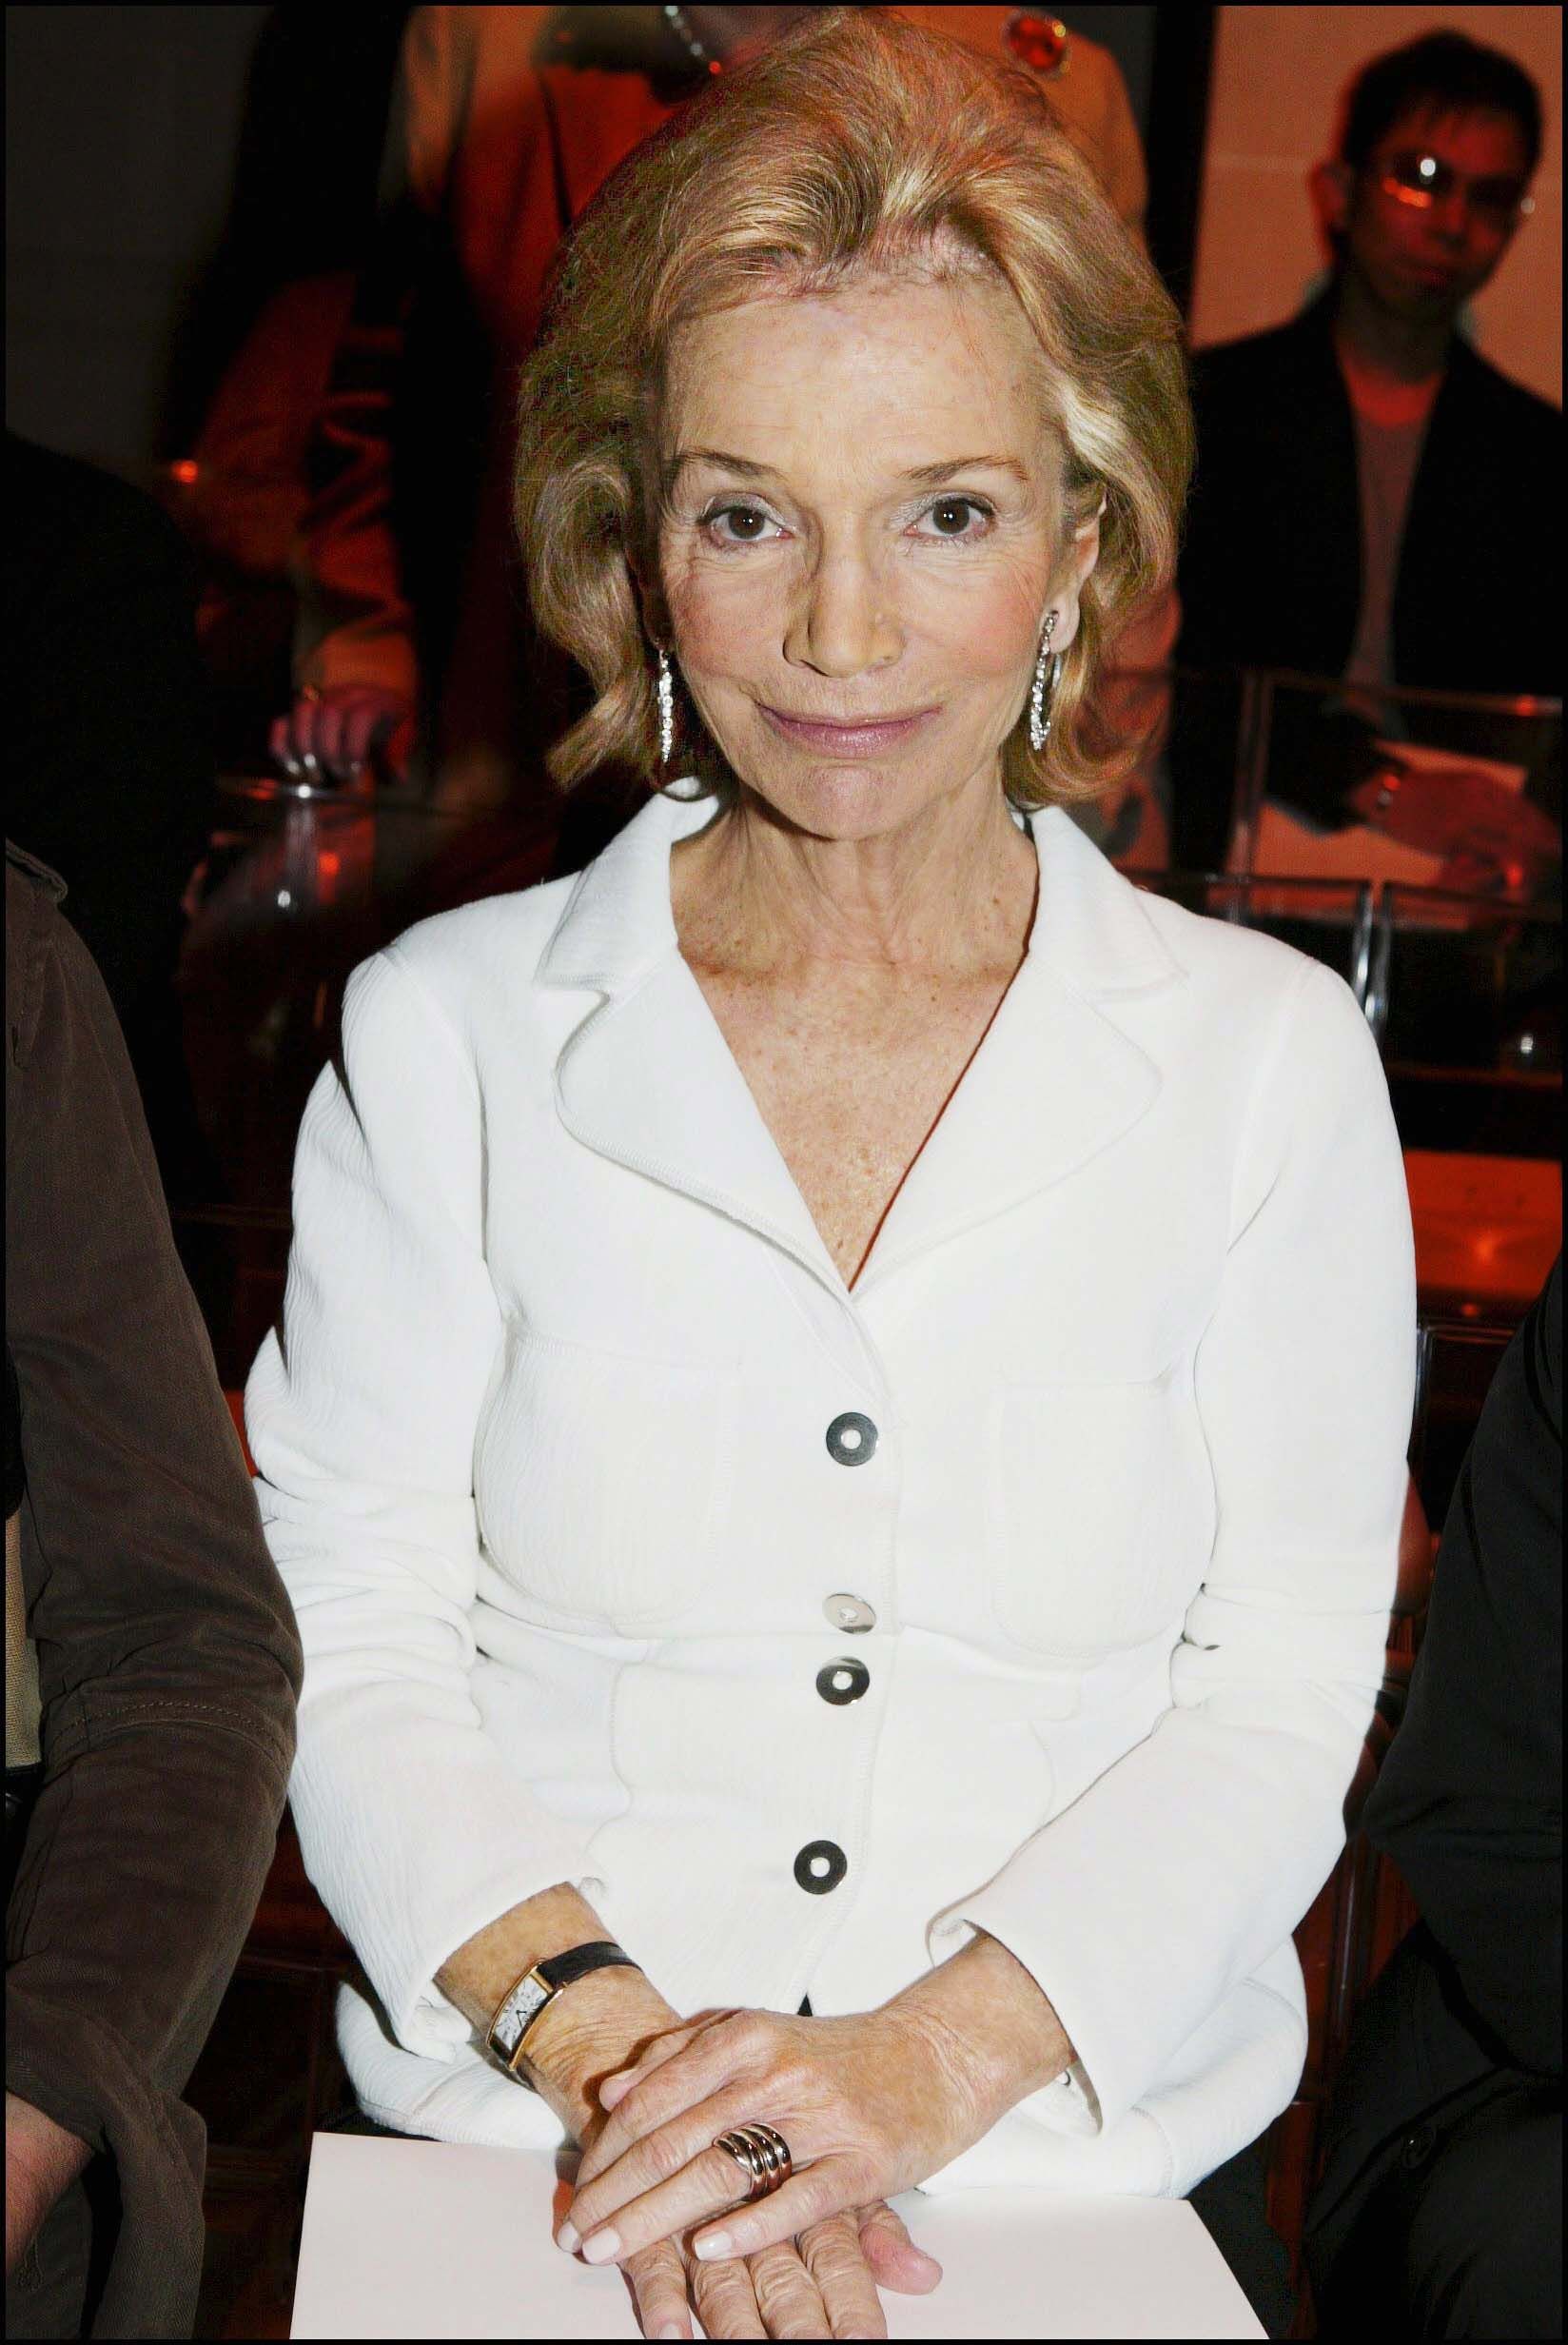 Lee Radziwill At The Ralph Rucci Fashion Show Hc Fall Winter 2004 2005 On July 5, 2004 In Paris, France